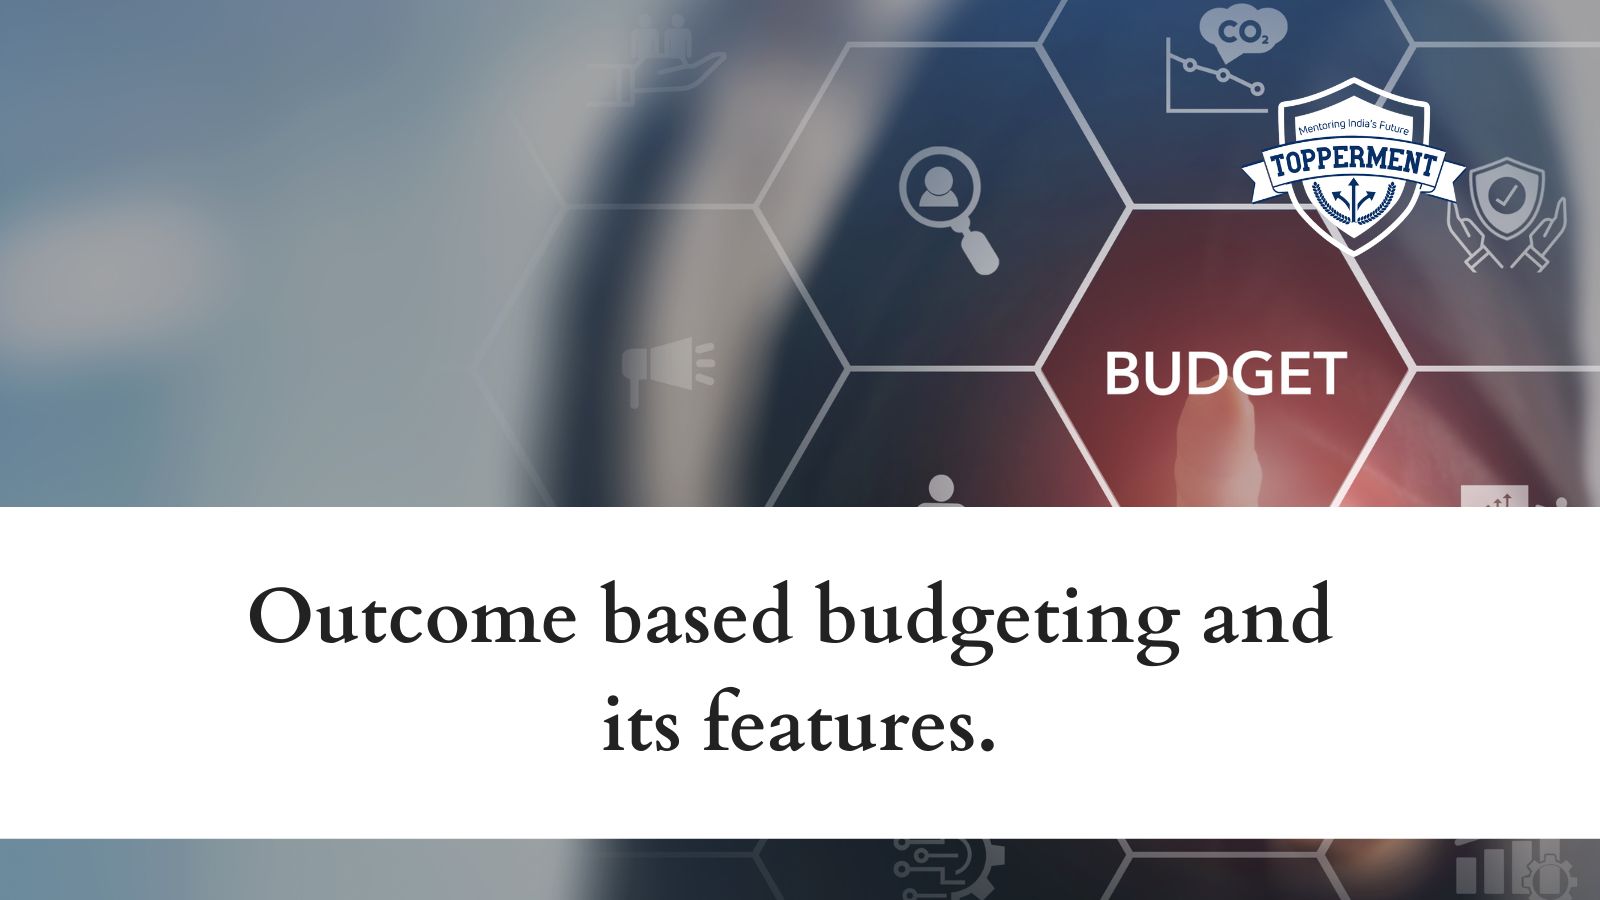 What-Is-Outcome-based-budgeting-and-its-features-Best-UPSC-IAS-Coaching-For-Mentorship-And-Guidance